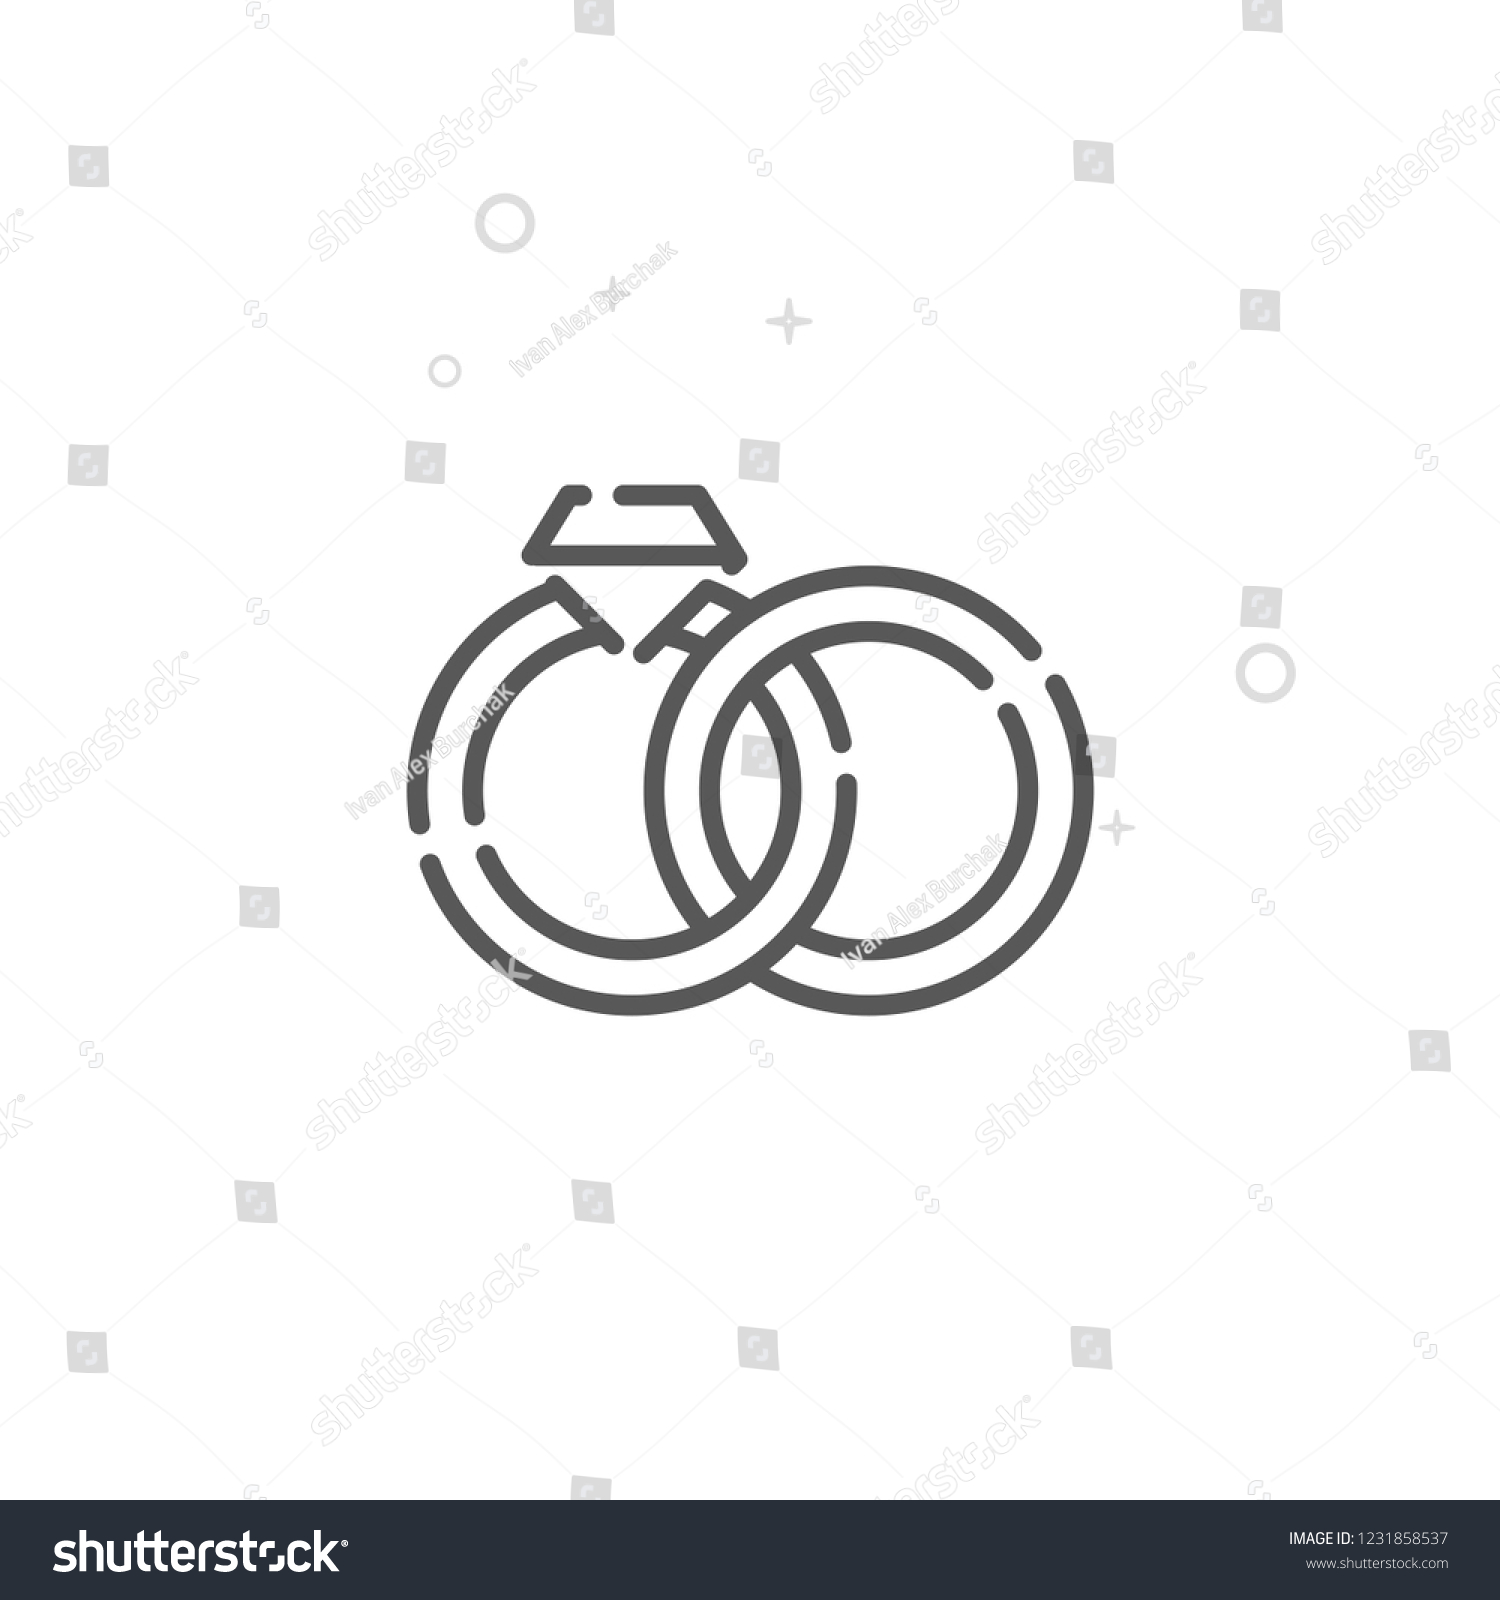 Engagement Rings Vector Line Icon Wedding Stock Vector (Royalty Free ...